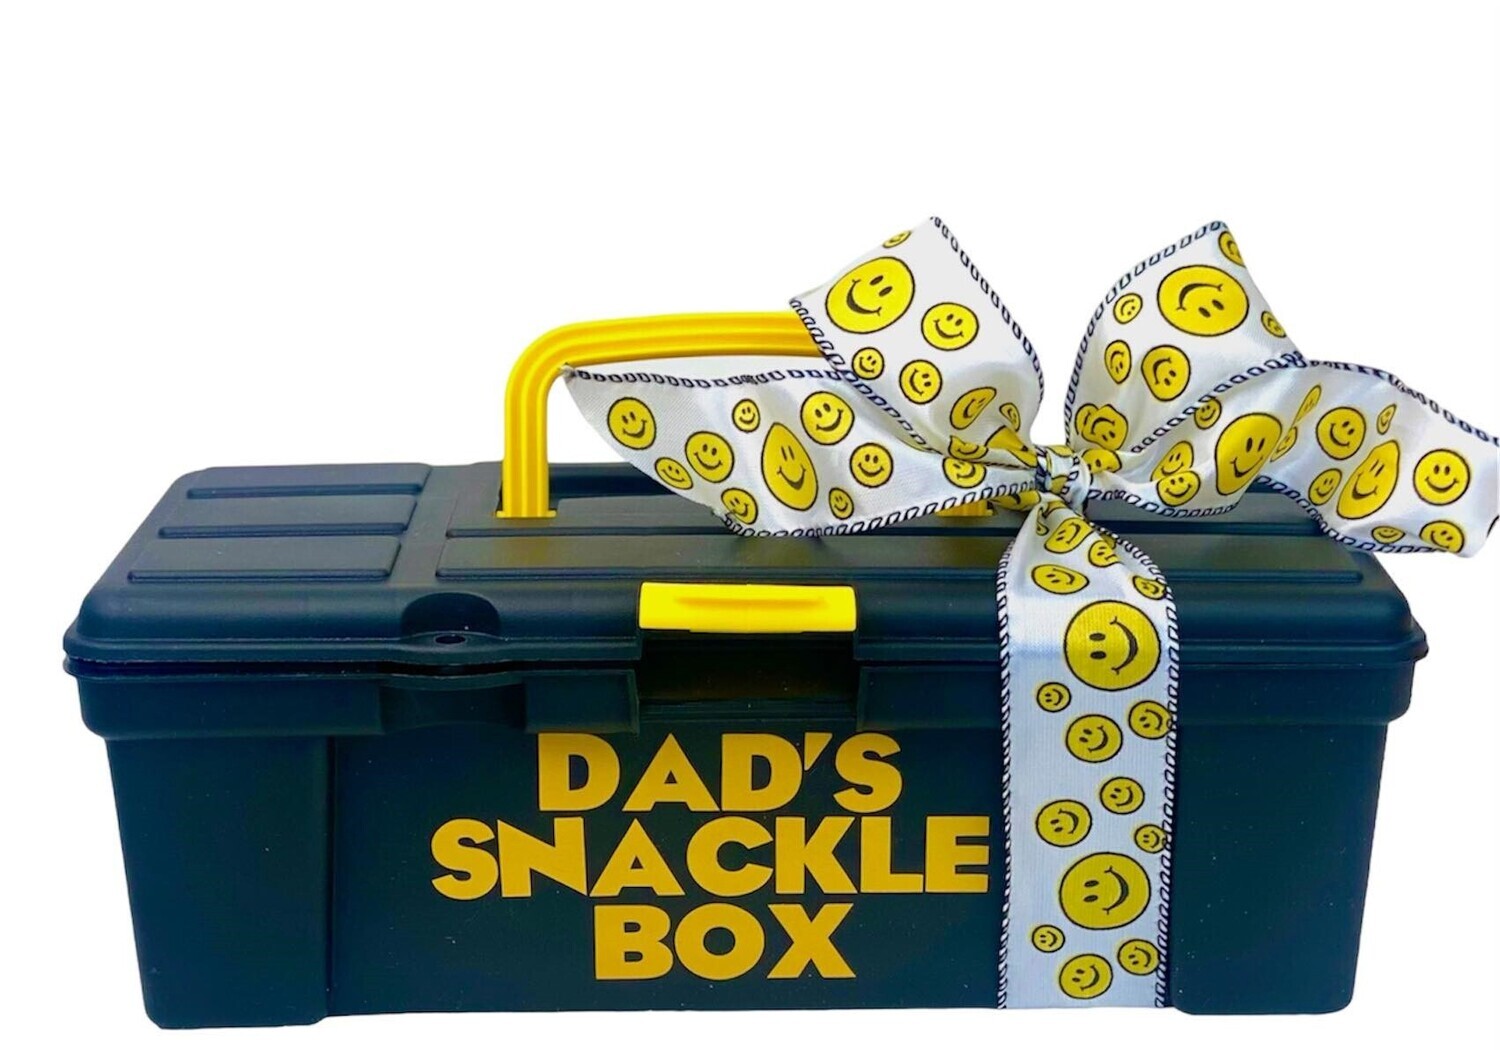 Snackle Box, Buy Gift Baskets Online, Ship Nationally